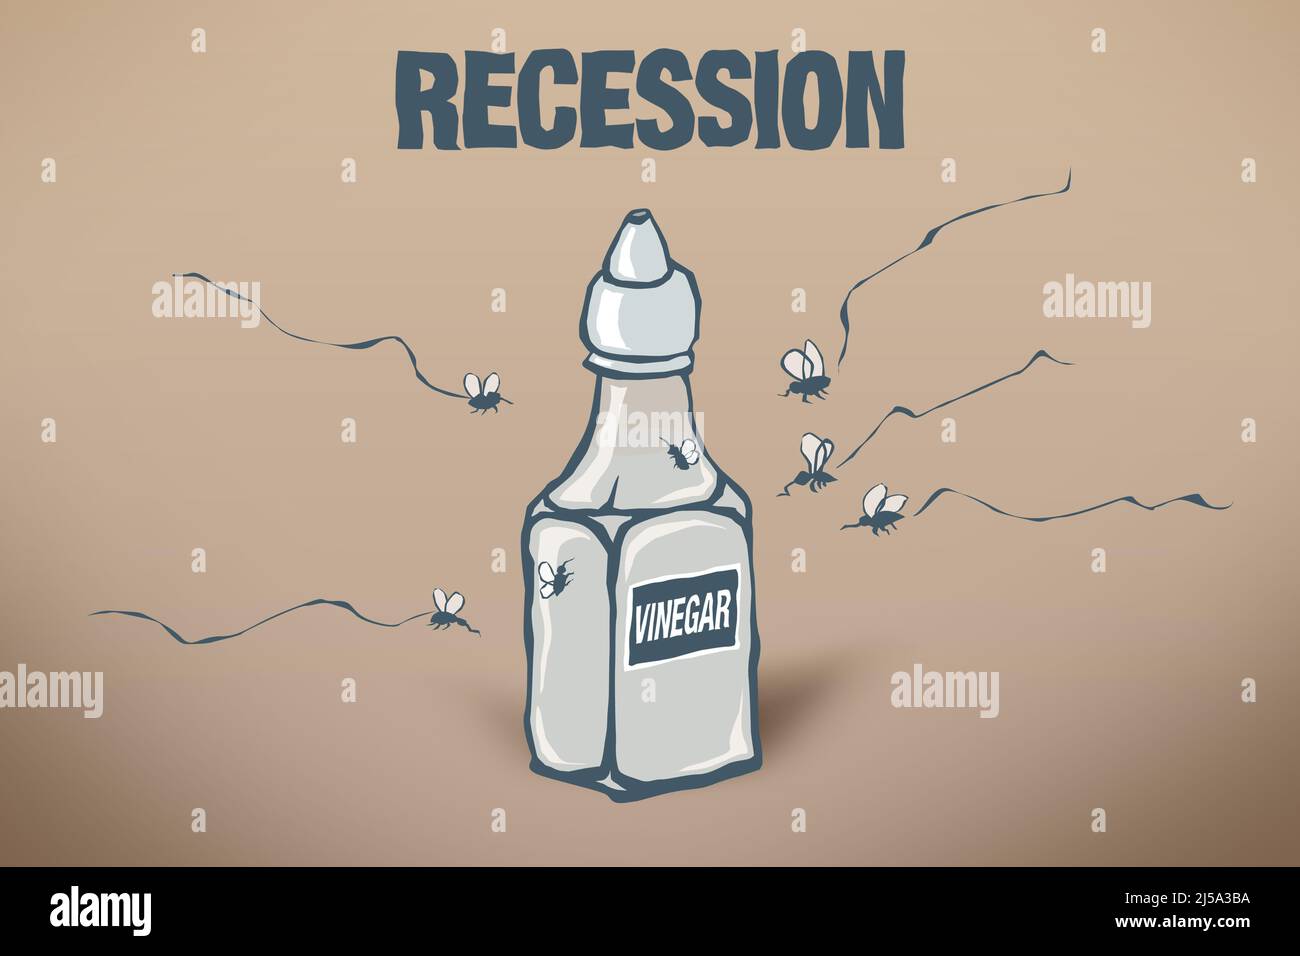 Recession creative concept. Financial crisis , economy crash , poverty. Flies rushing for vinegar because there is nothing else. Cost of living crisis Stock Photo